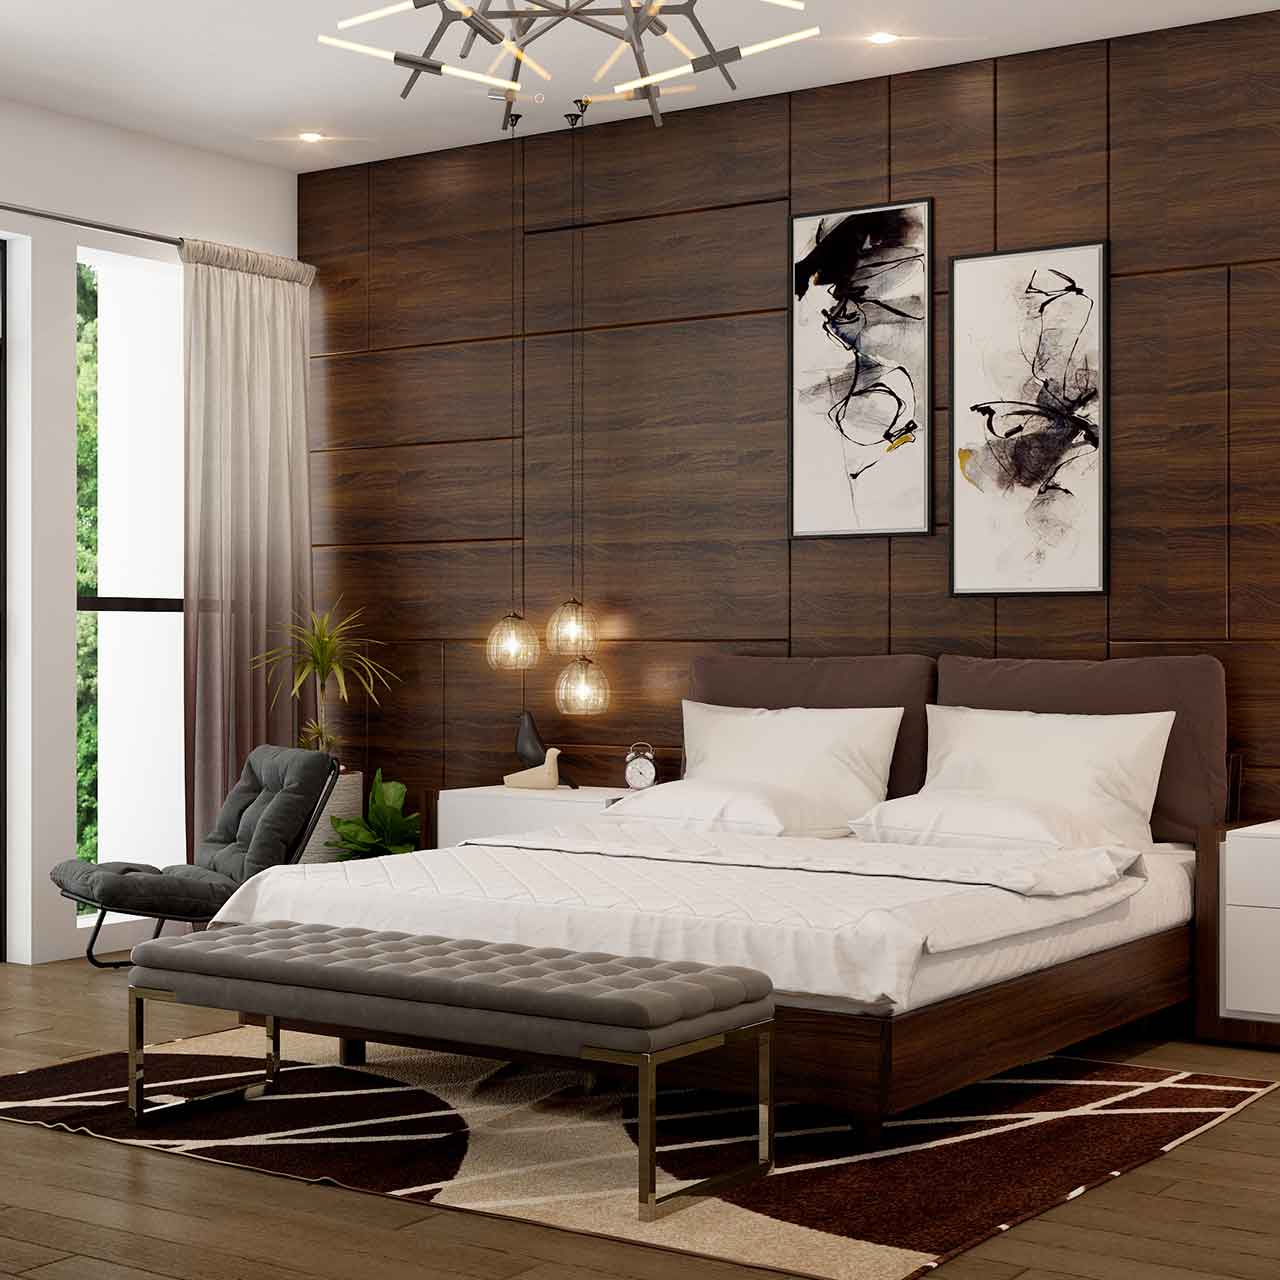 Traditional style bedroom interior designs are filled with positive vibes, pleasing atmosphere and clutter-free